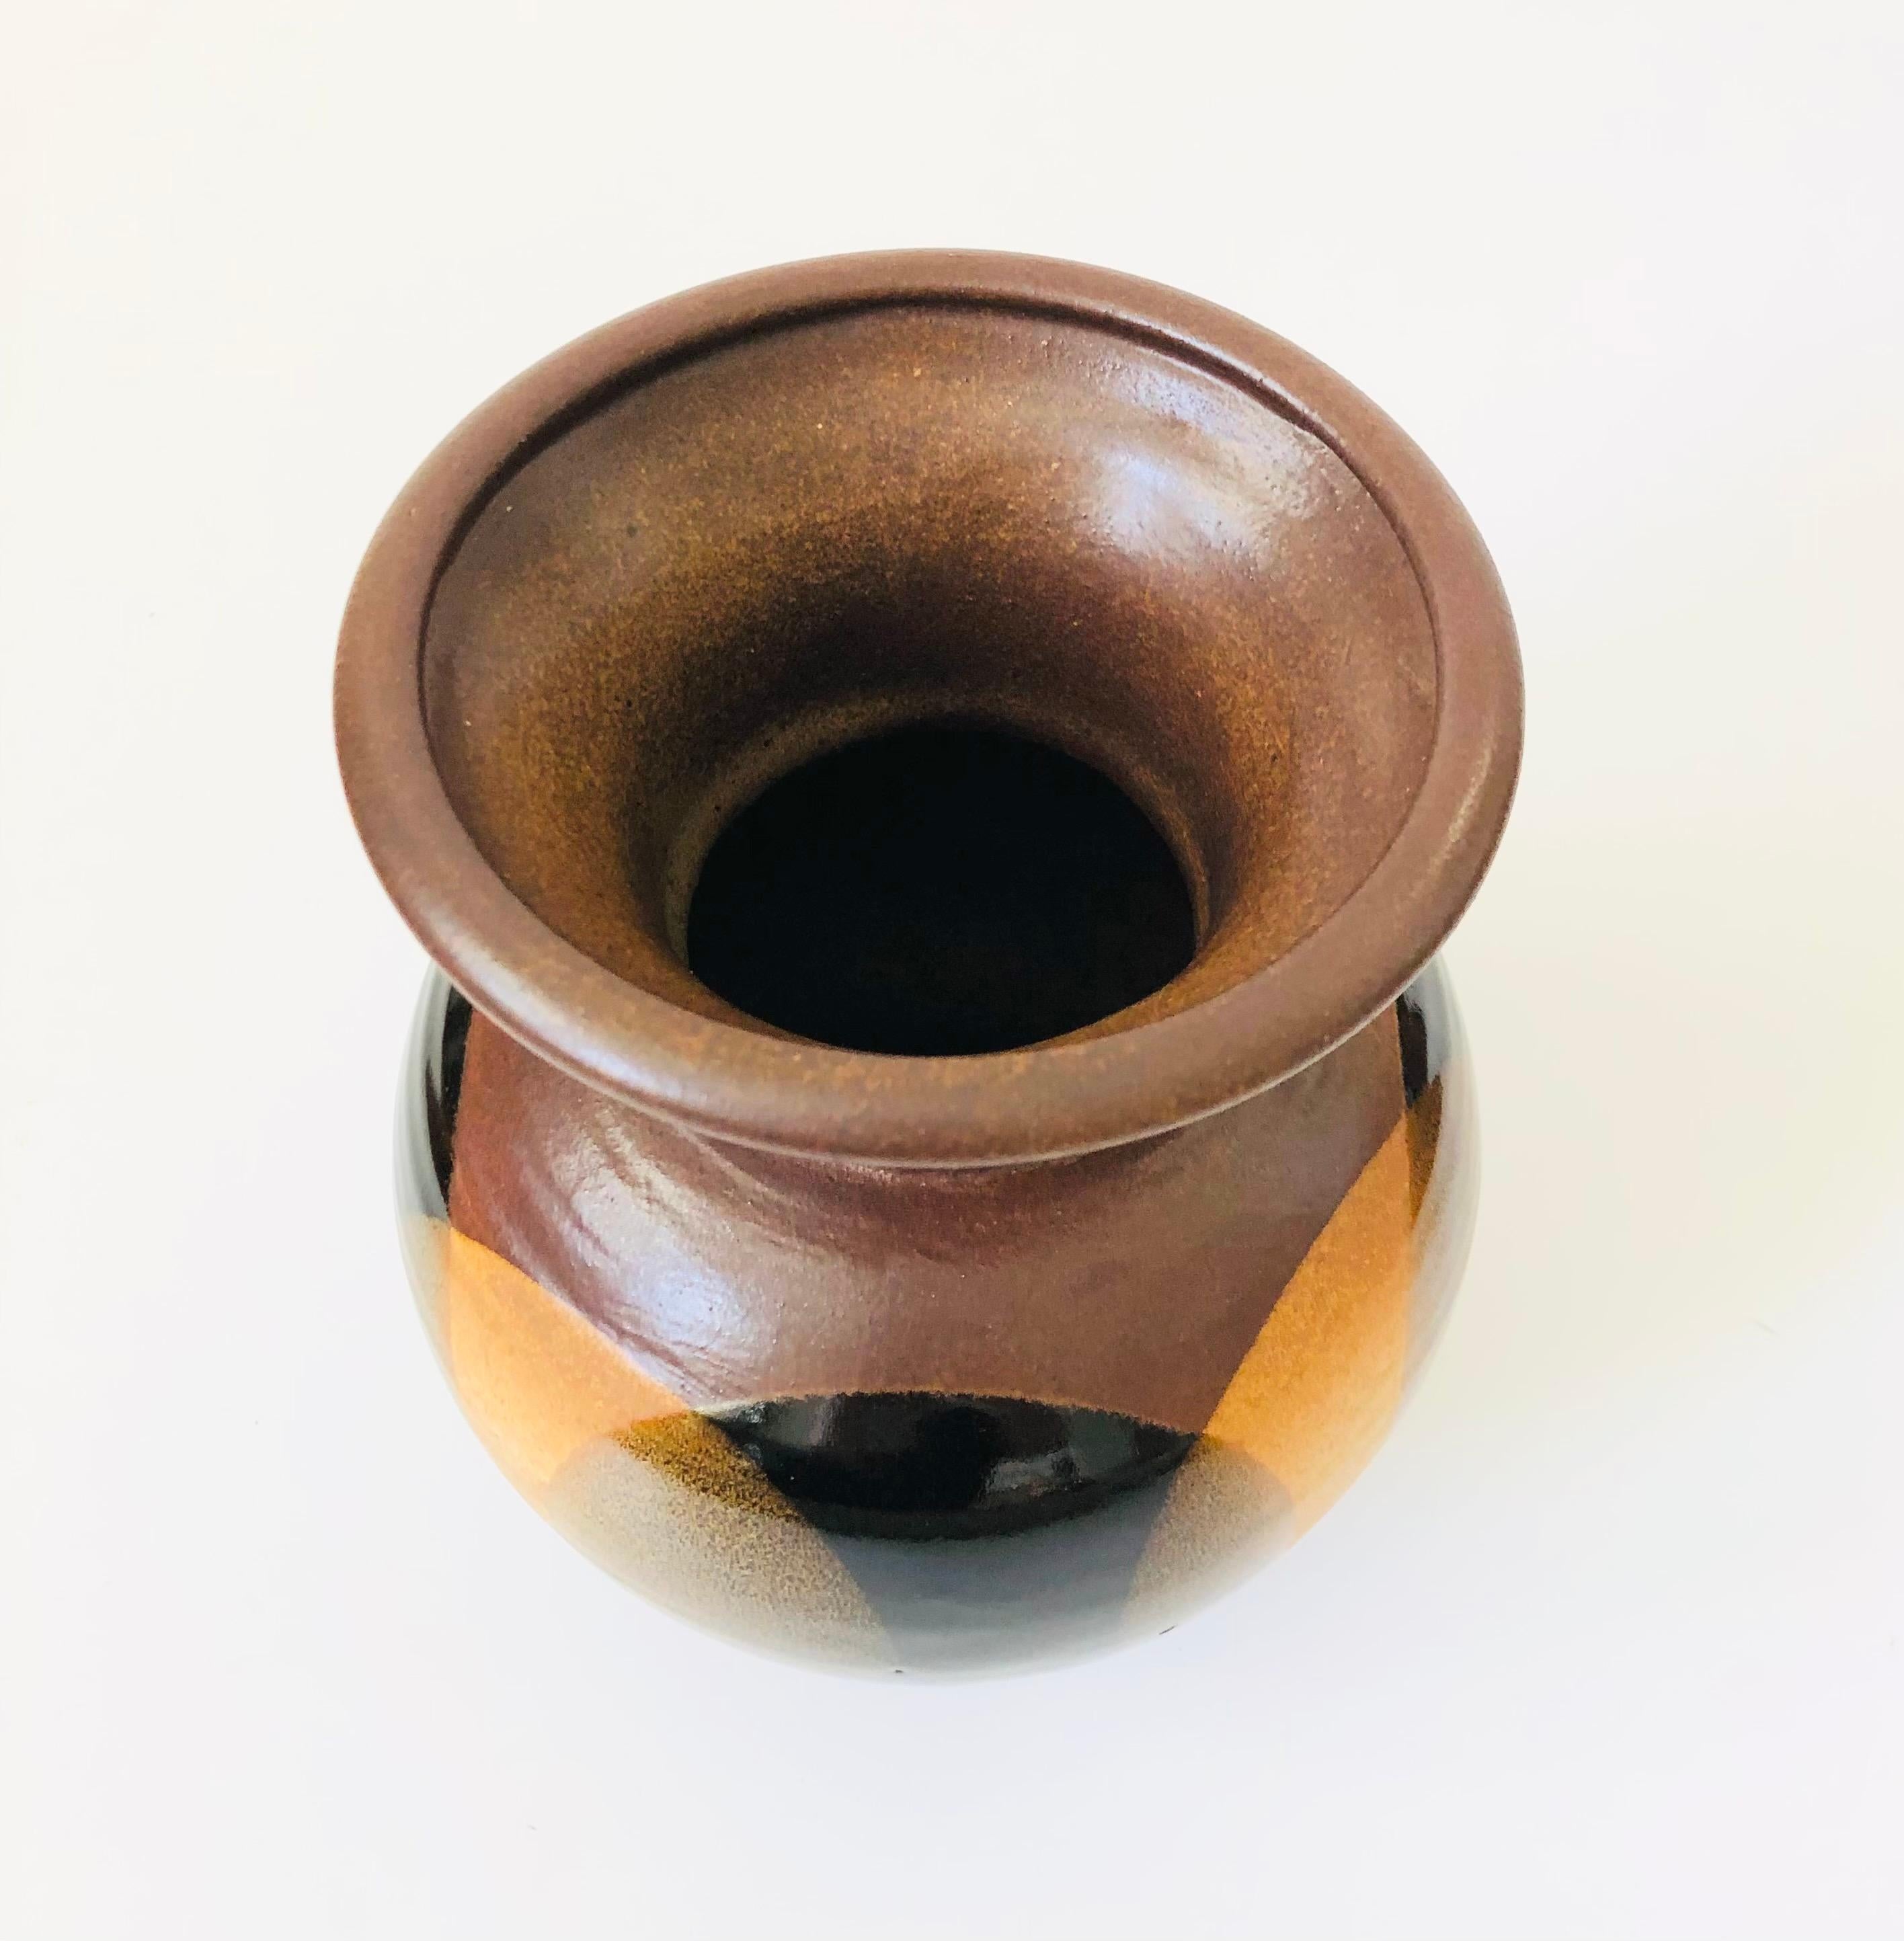 A wonderful mid century vase designed by Robert Maxwell for Pottery Craft. Features an overlapping circle design to the glaze in brown and black.

